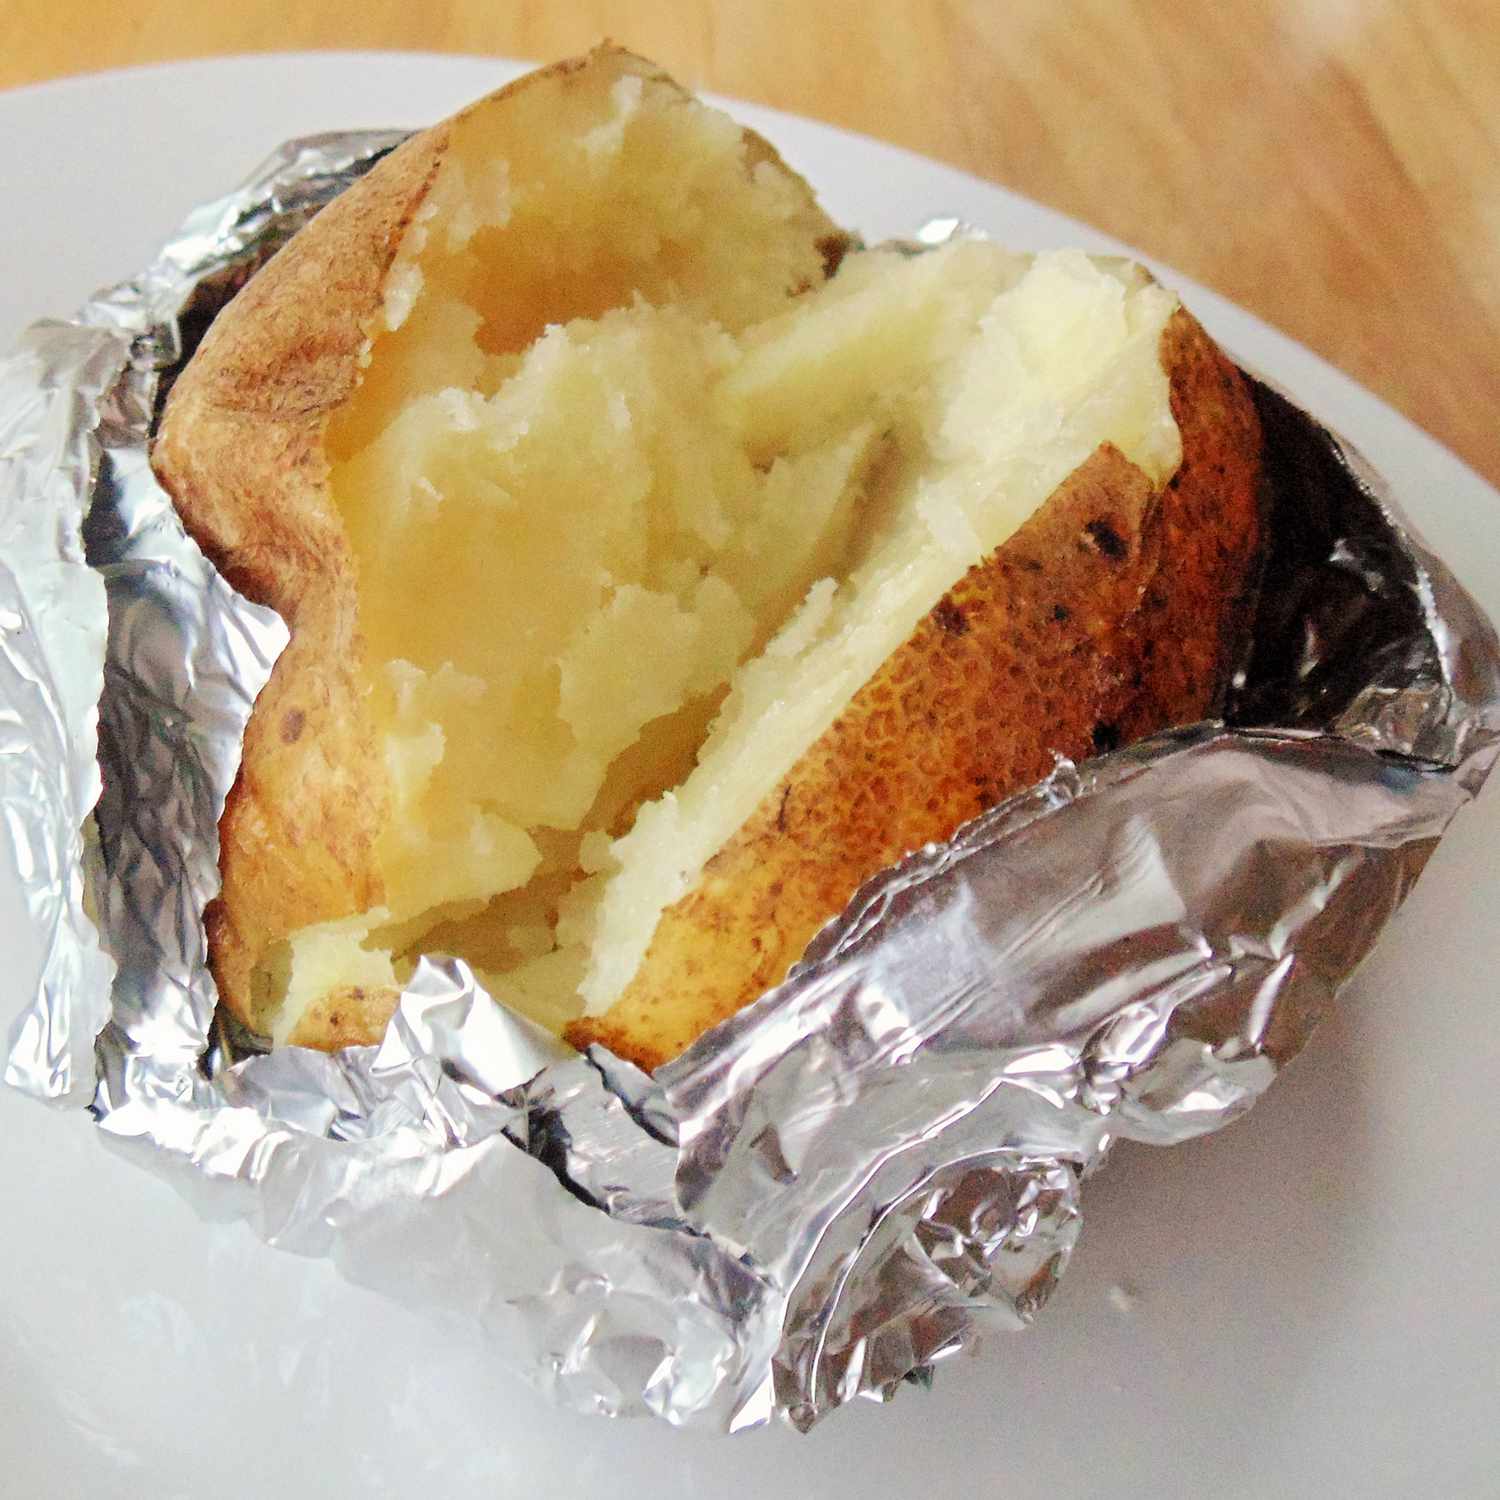 close up view of a baked cut in half wrapped with aluminum foil on a plate